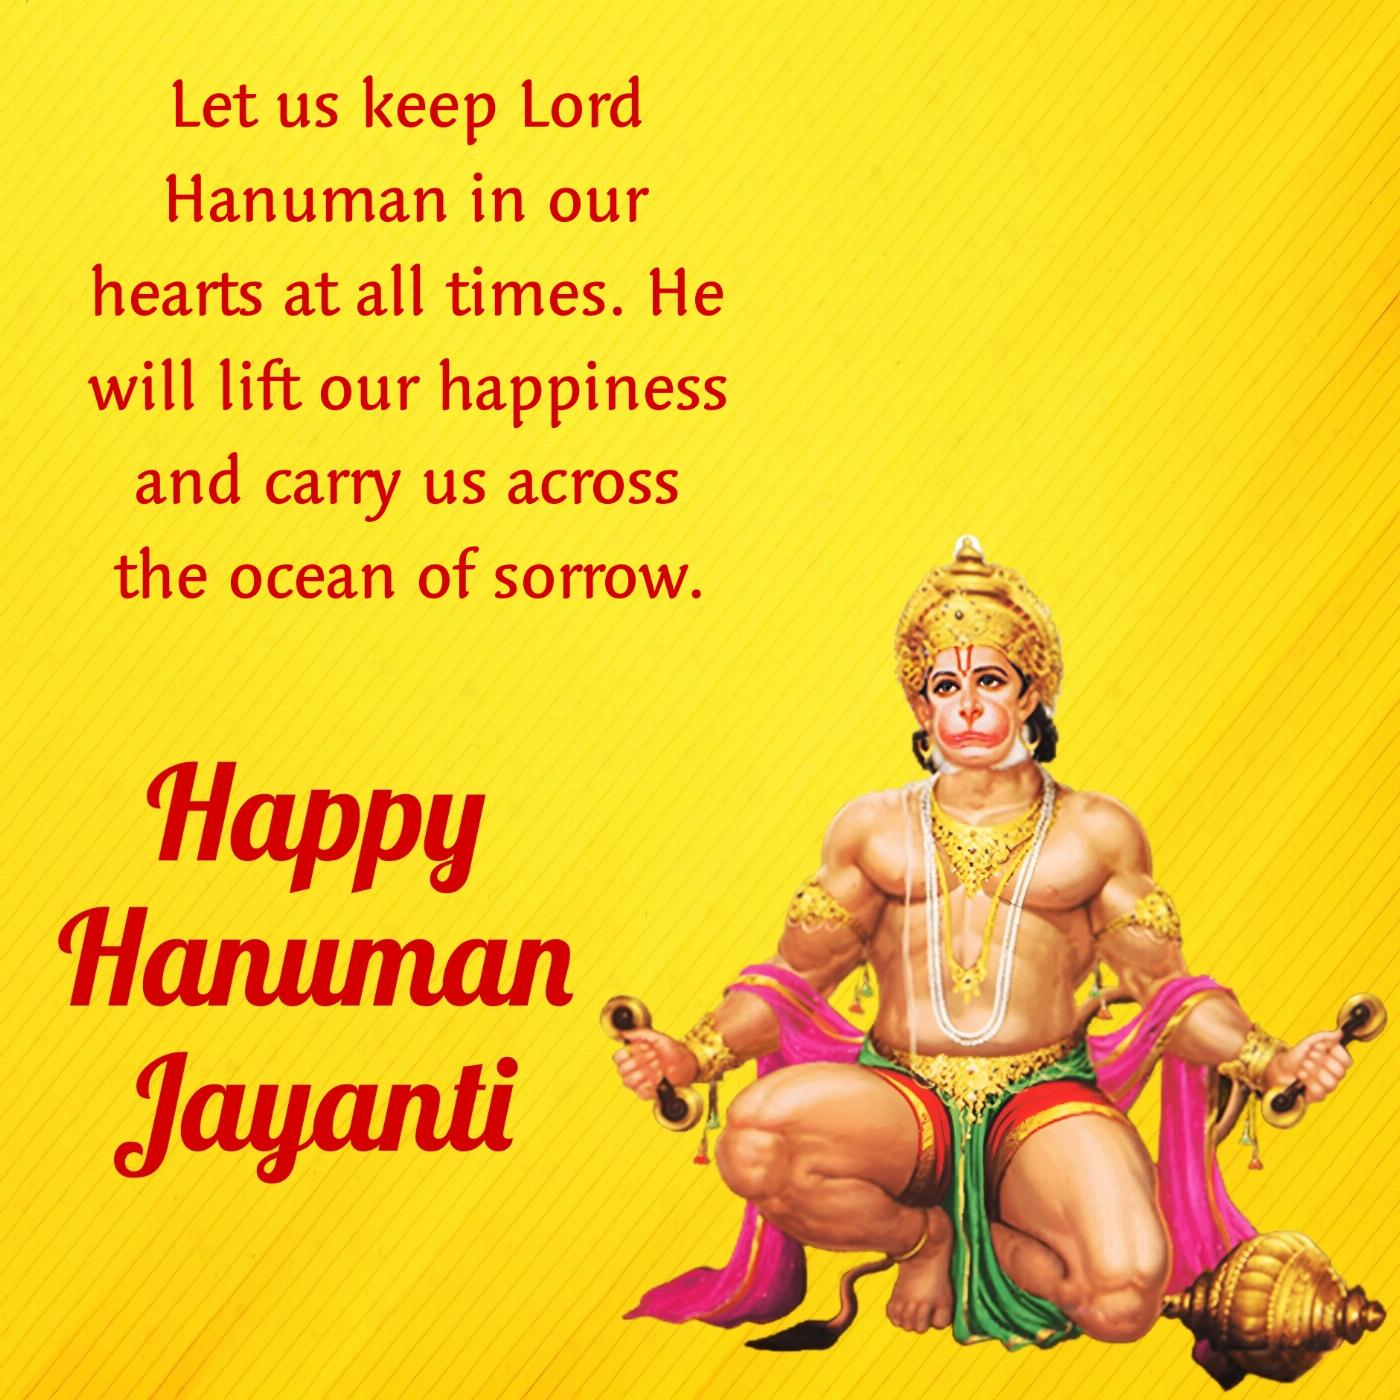 Let us keep Lord Hanuman in our hearts at all times